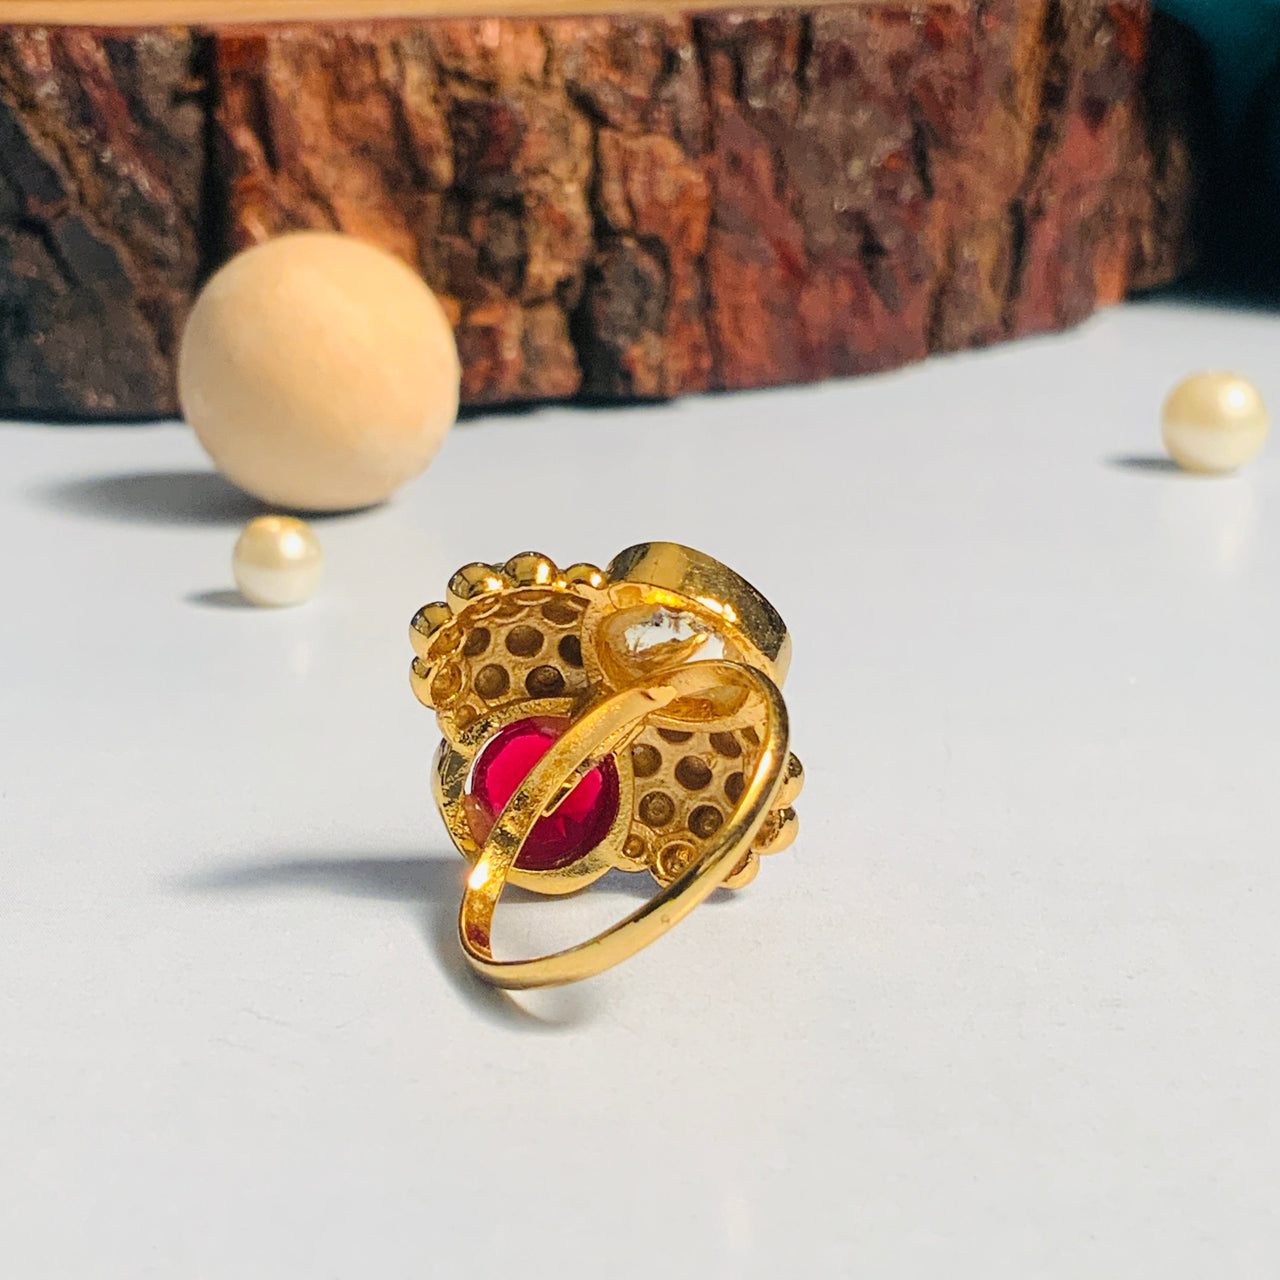 Contemporary High Quality Gold Plated Ring - Abdesignsjewellery